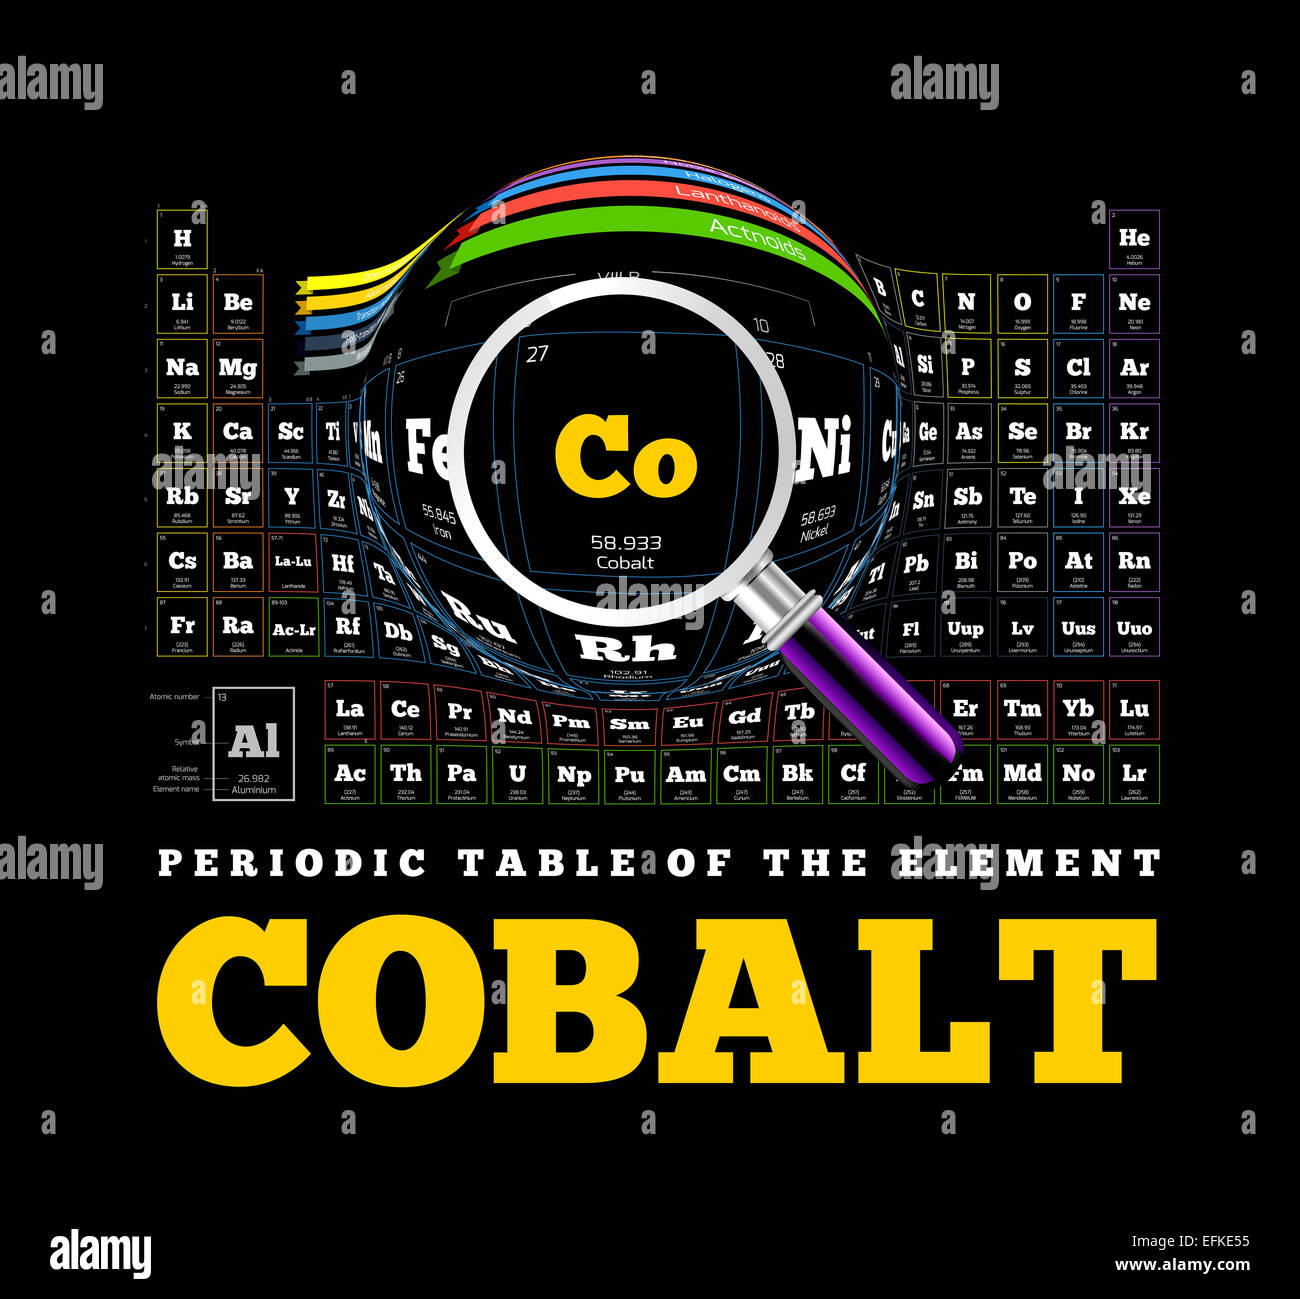 Periodic Table of the element. Cobalt, Co Stock Photo